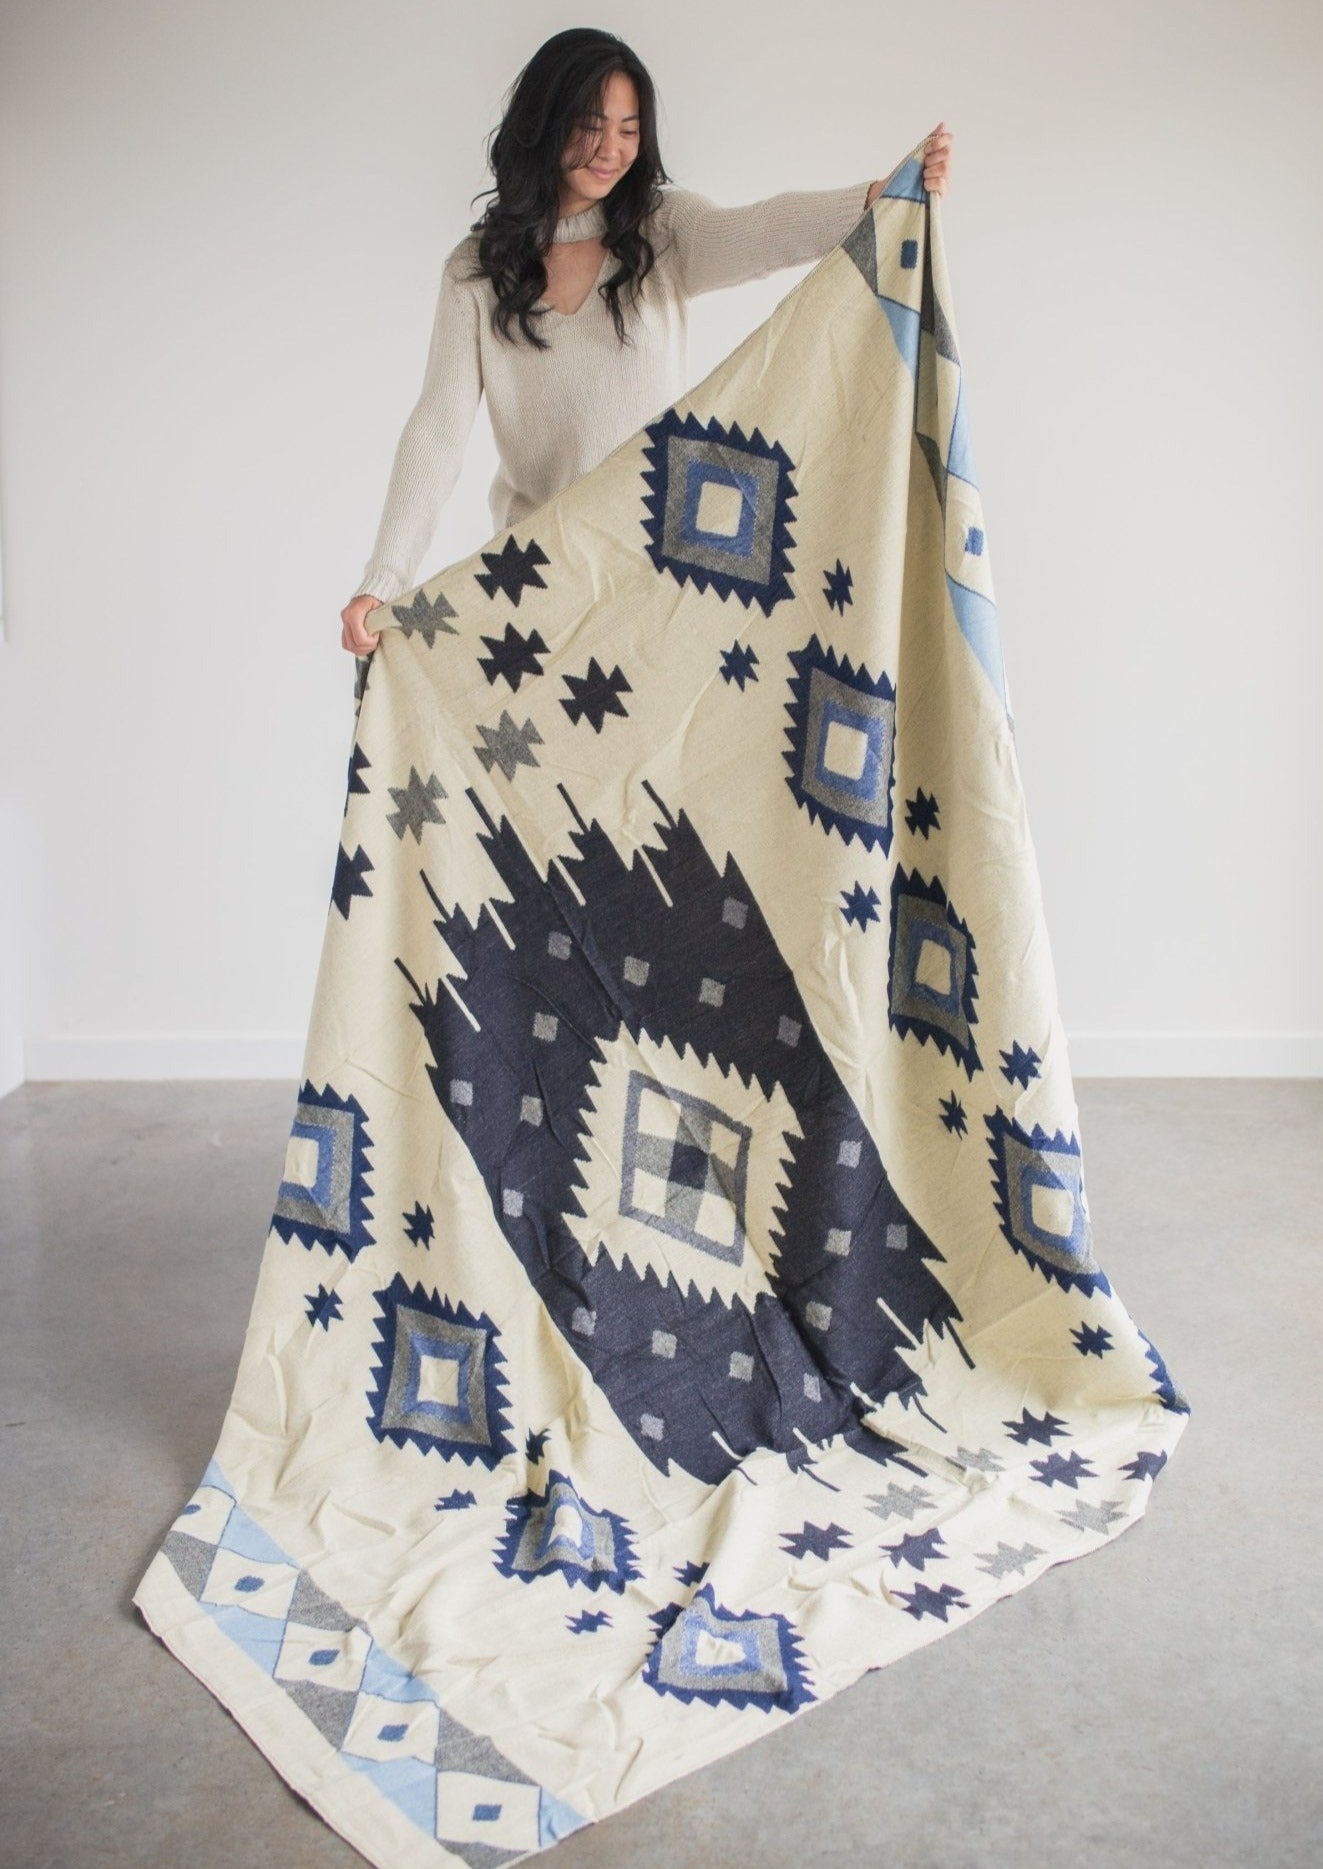 asian girl wearing soft sweater holds up reverse side of alpaca blanket so you can see the full design. 